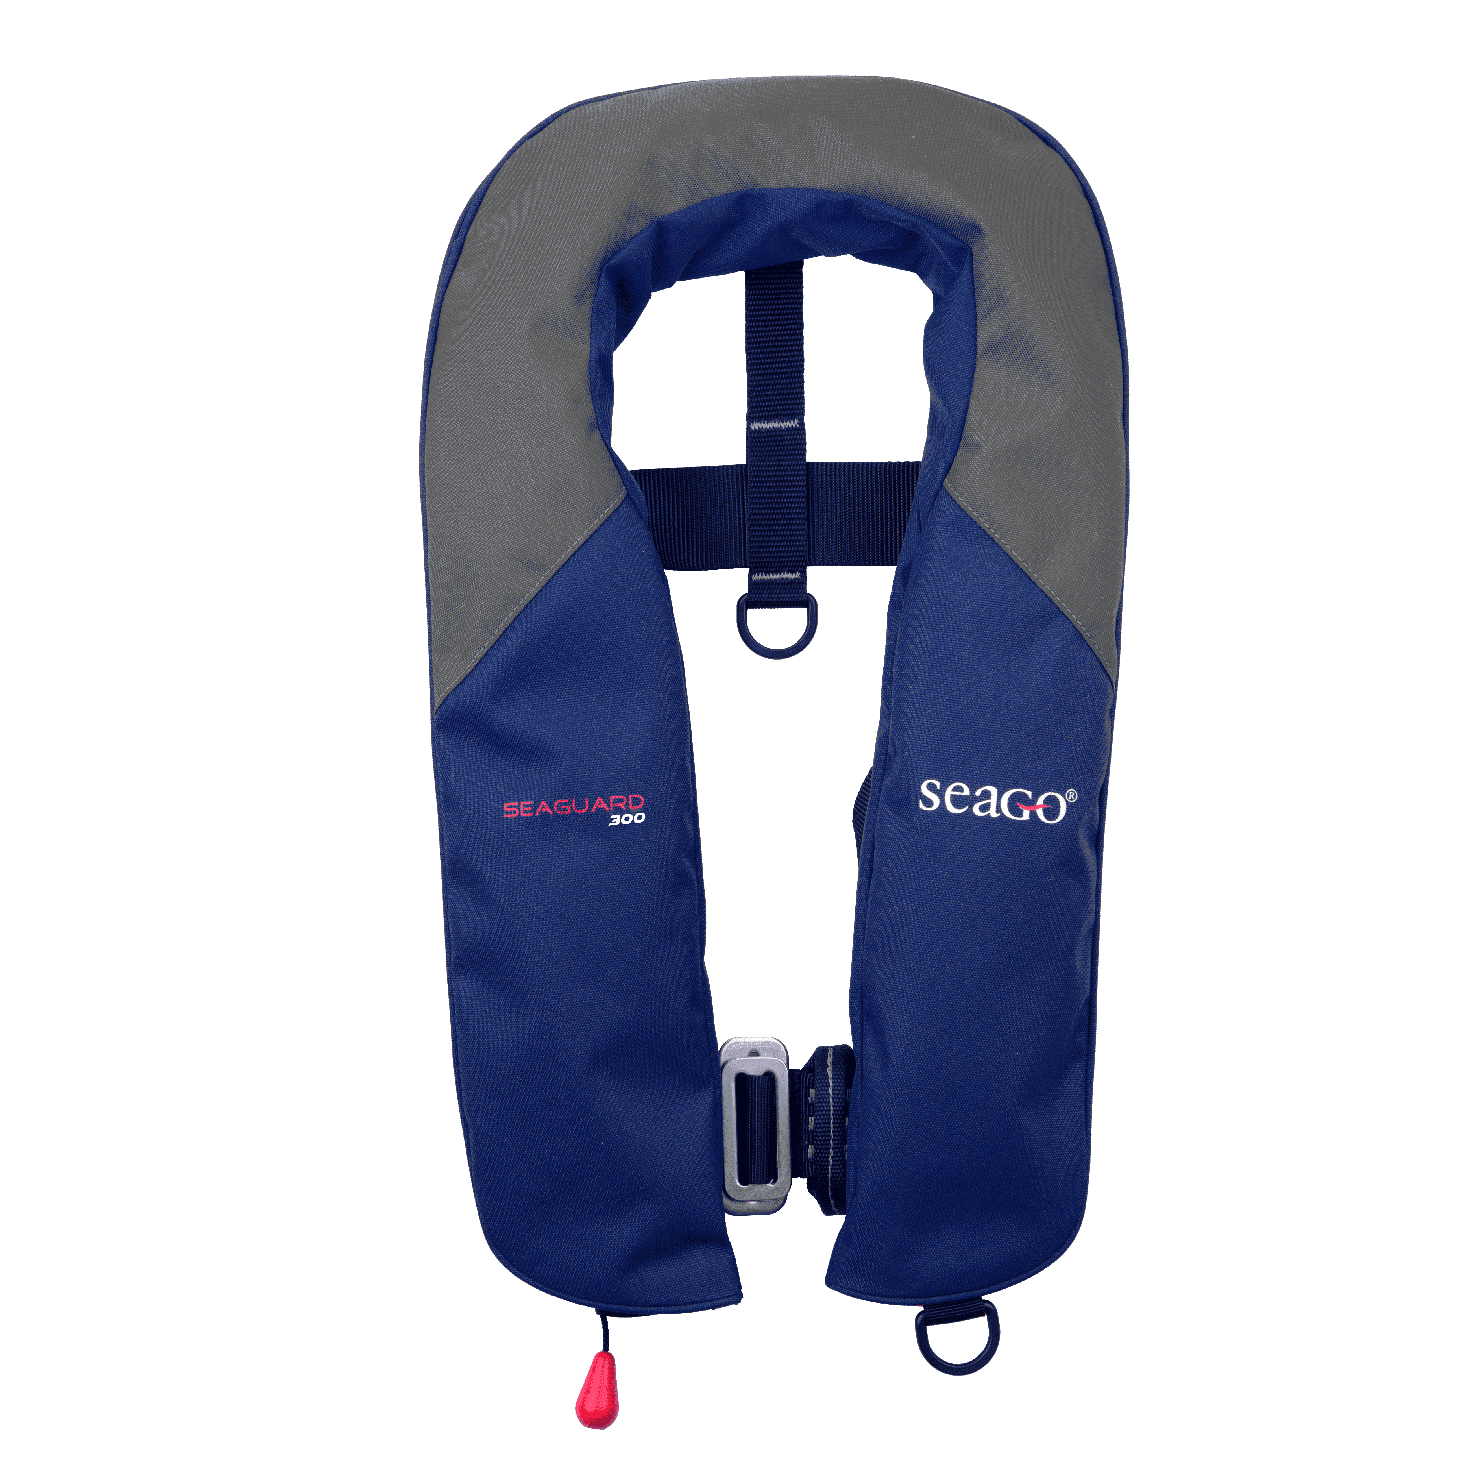 Seago Seaguard 300N Automatic Lifejacket with Harness - Navy